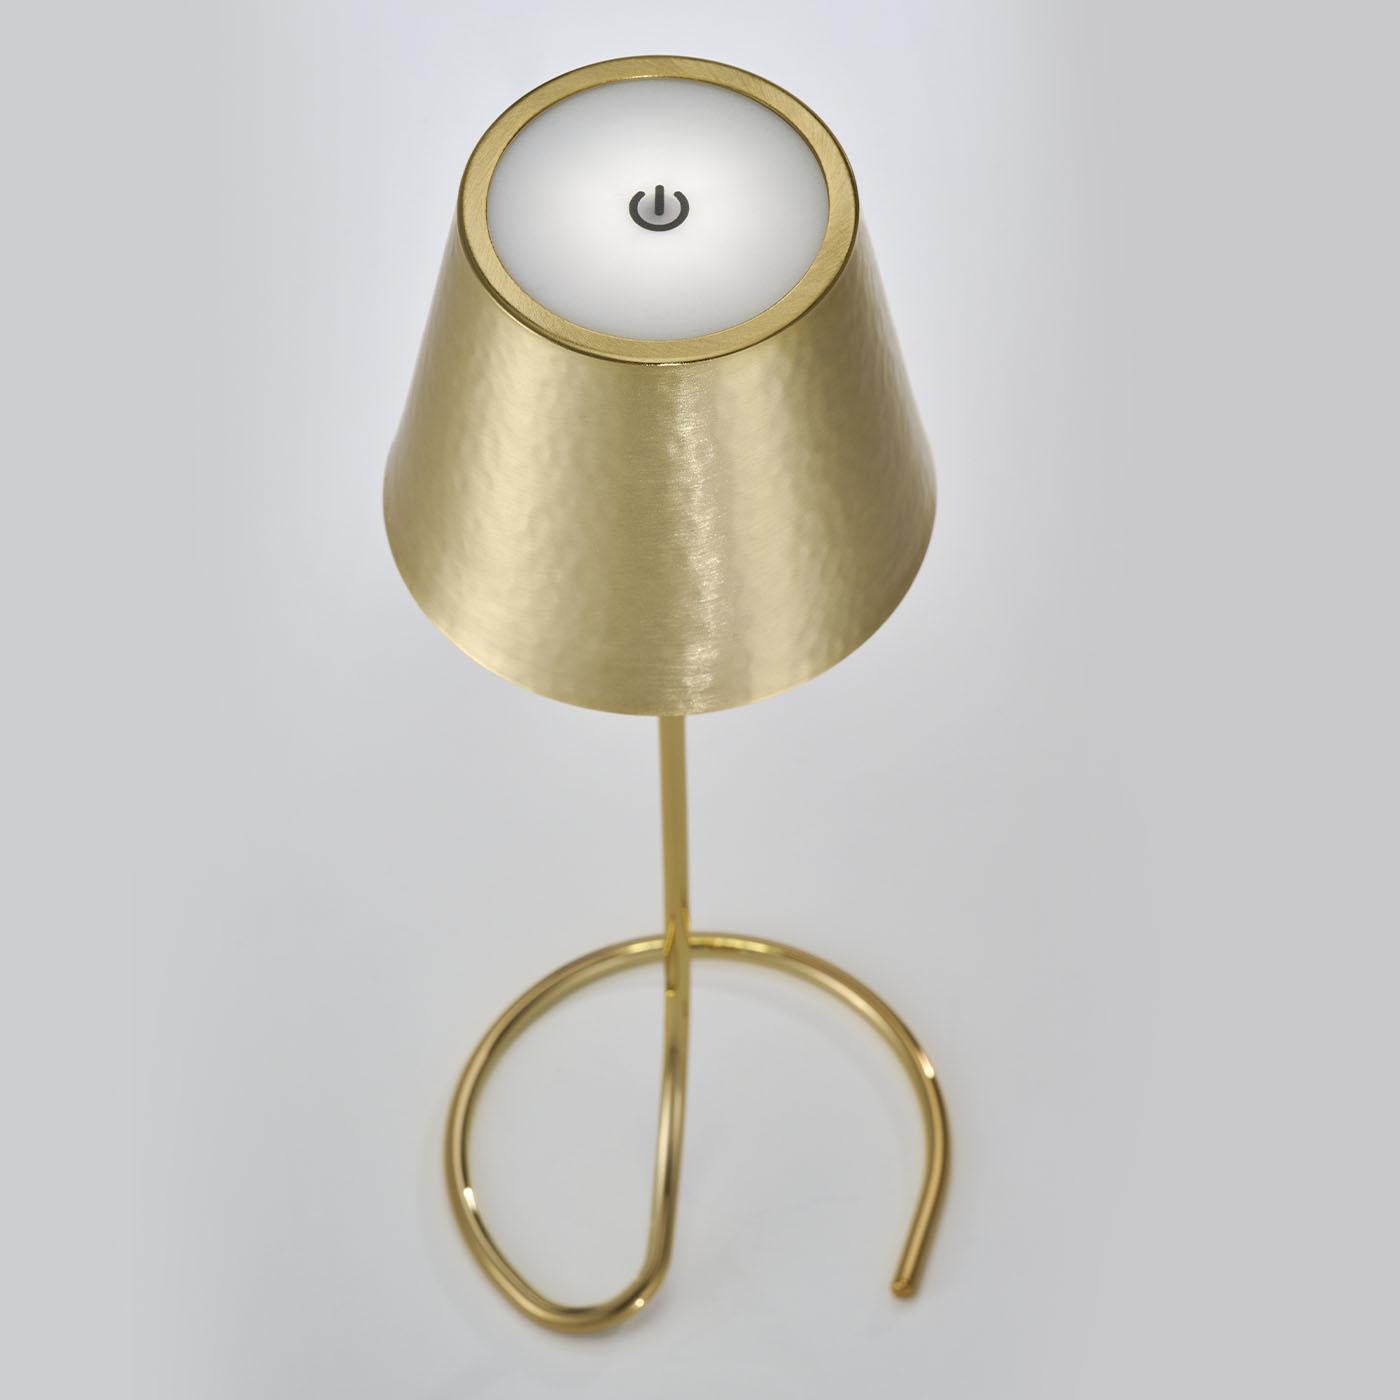 Stunning in its simplicity, this sleek lamp merges traditional glamor with modern details. The hand-wrought lampshade is supported by a dainty rod whose seamless, continuous design transforms the stem into the base, elevating the piece's luxurious